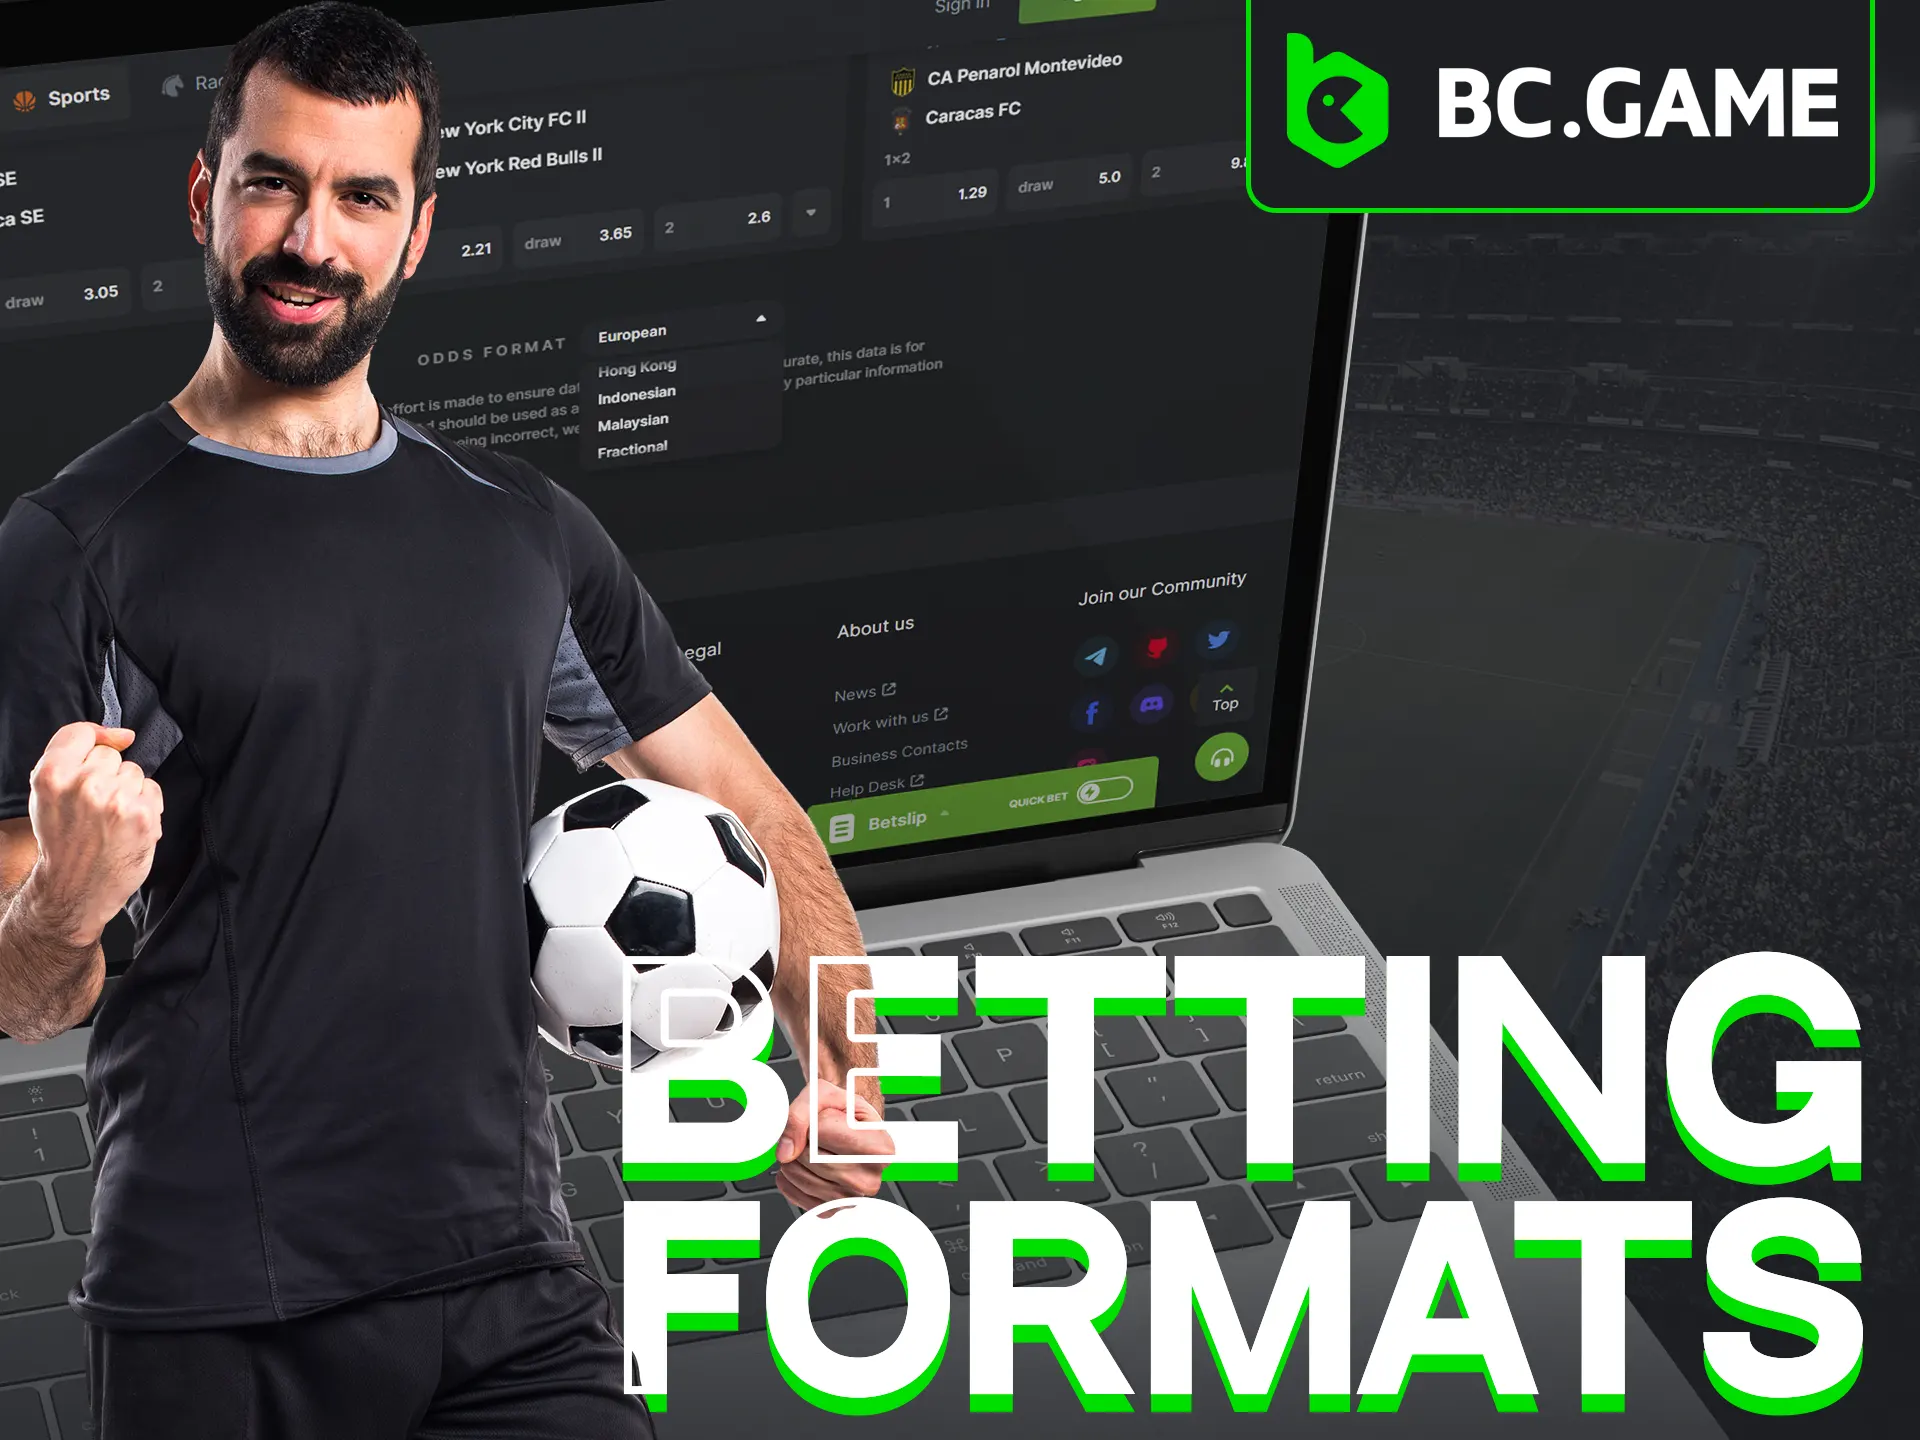 BC Game offers diverse soccer betting odds for better gaming.